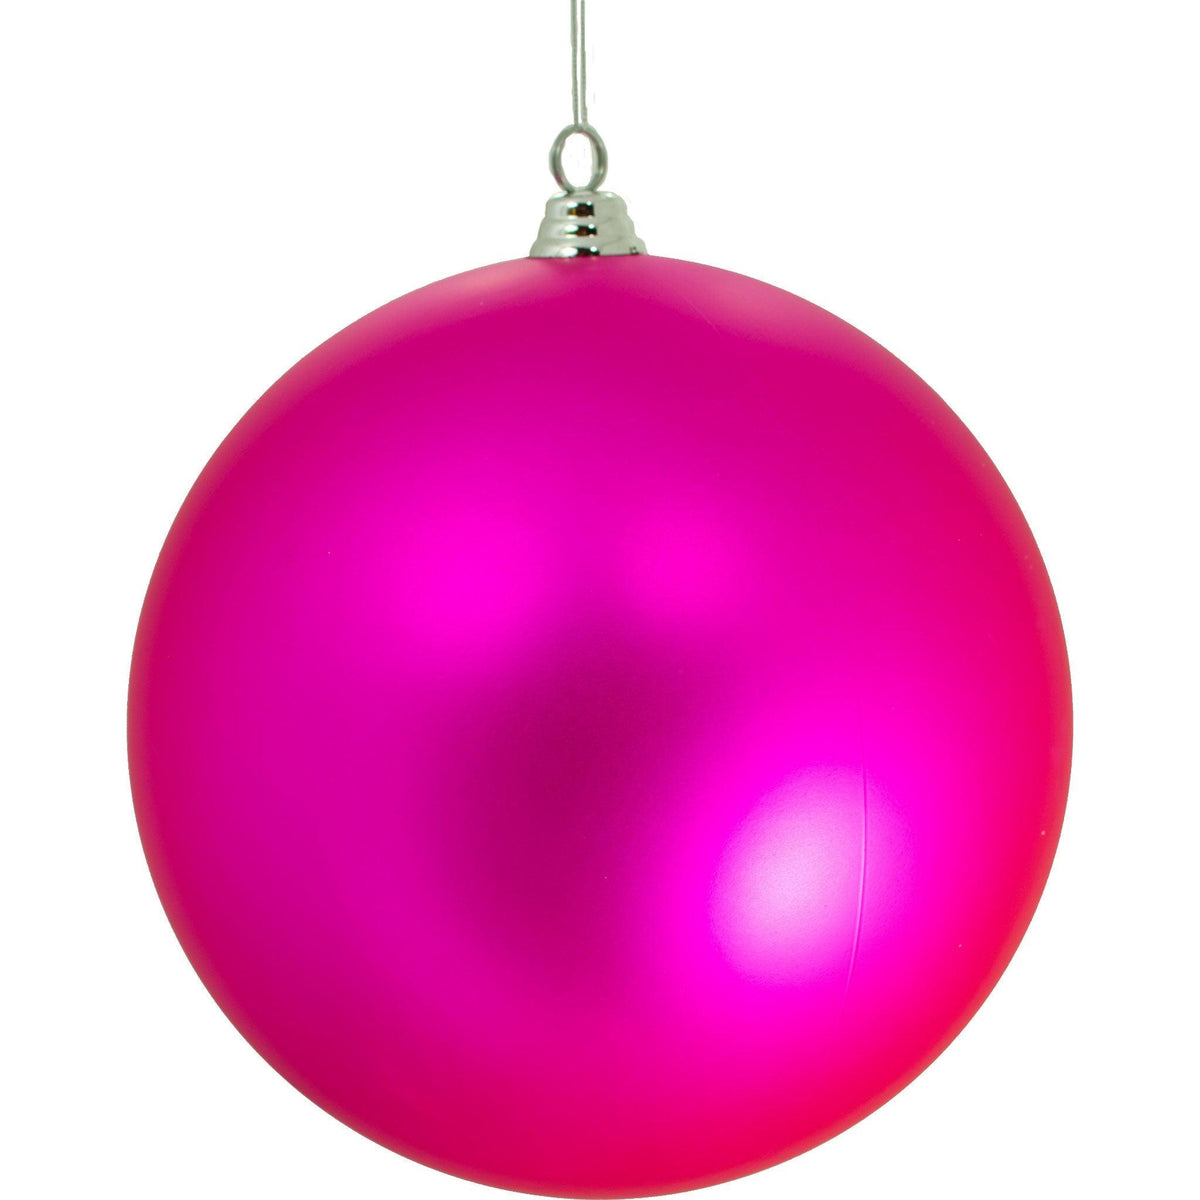 Lee Display offers brand new Shiny Matte Pink Plastic Ball Ornaments at wholesale prices for affordable Christmas Tree Hanging and Holiday Decorating on sale at leedisplay.com